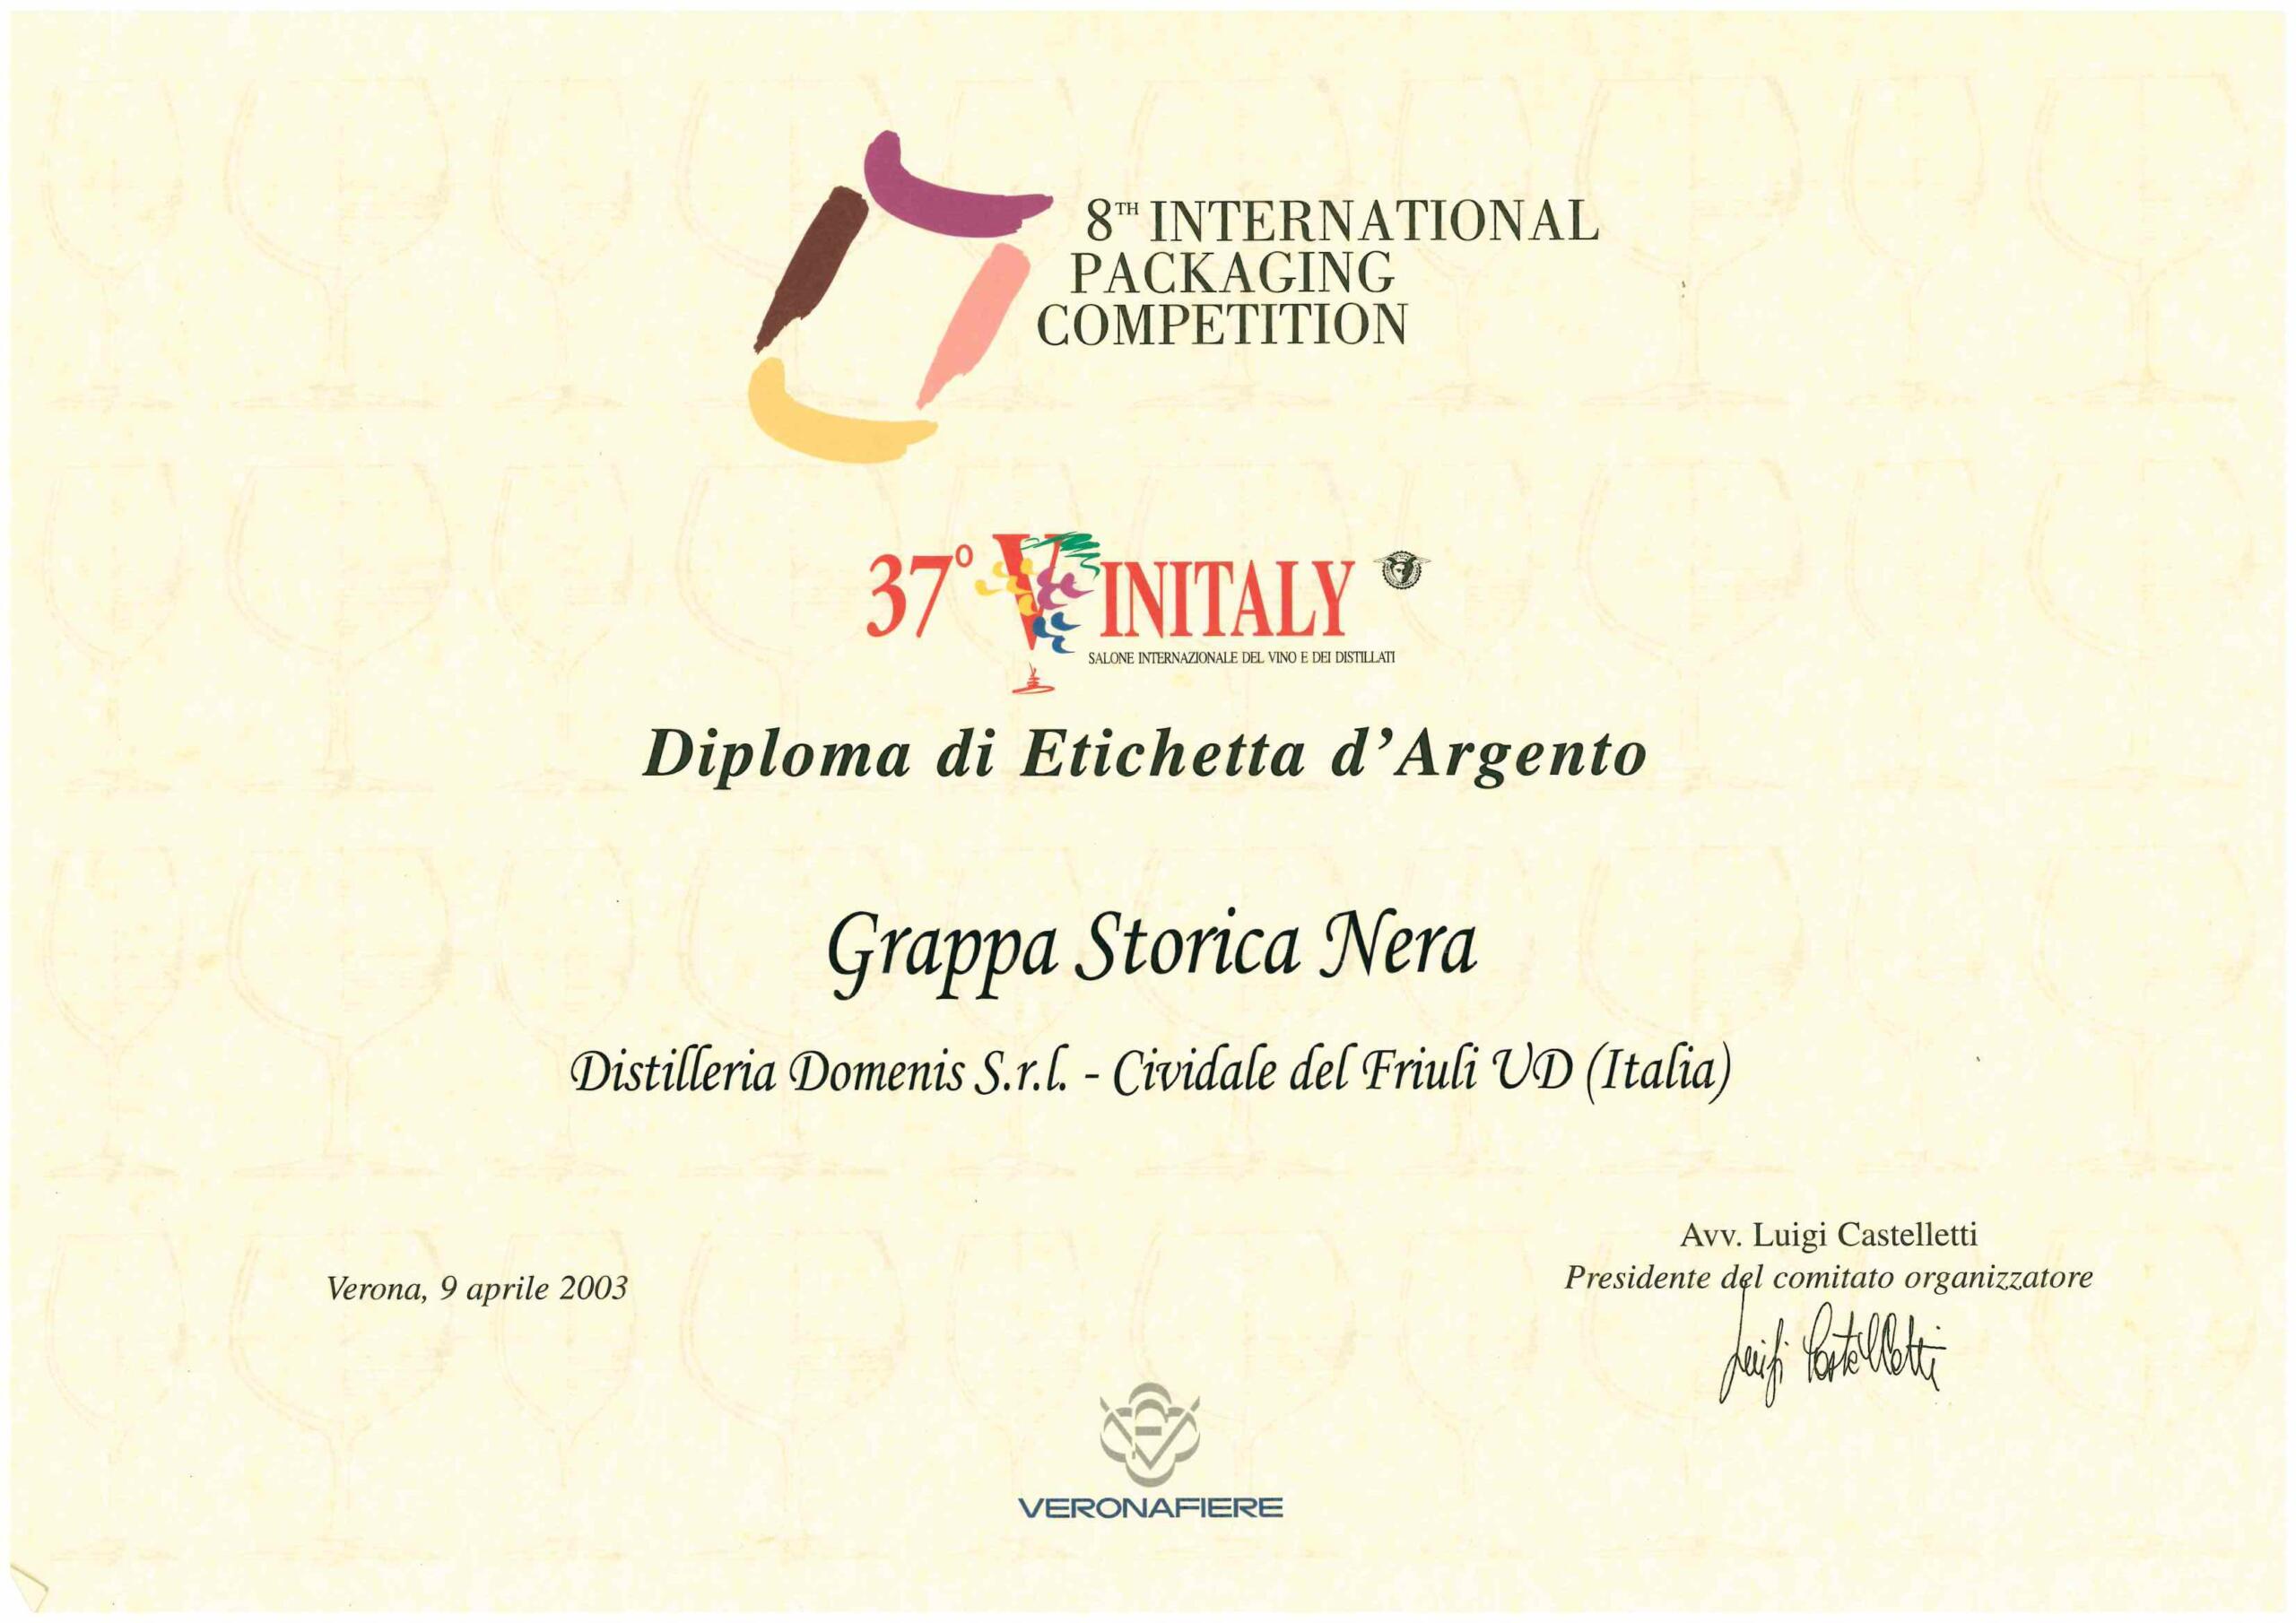 International Packaging Competition 2003 – Grappa Storica Nera